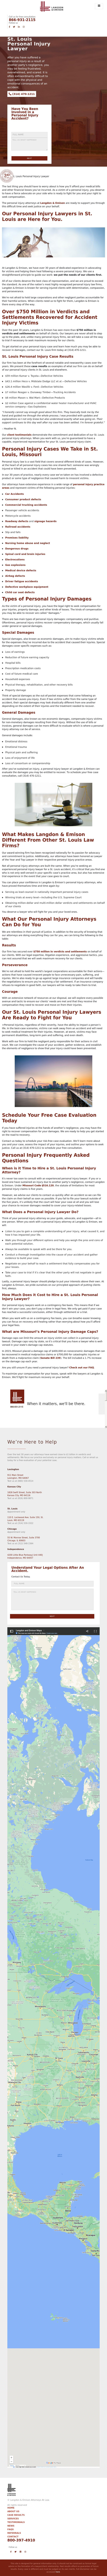 Langdon & Emison Attorneys at Law - St. Louis MO Lawyers